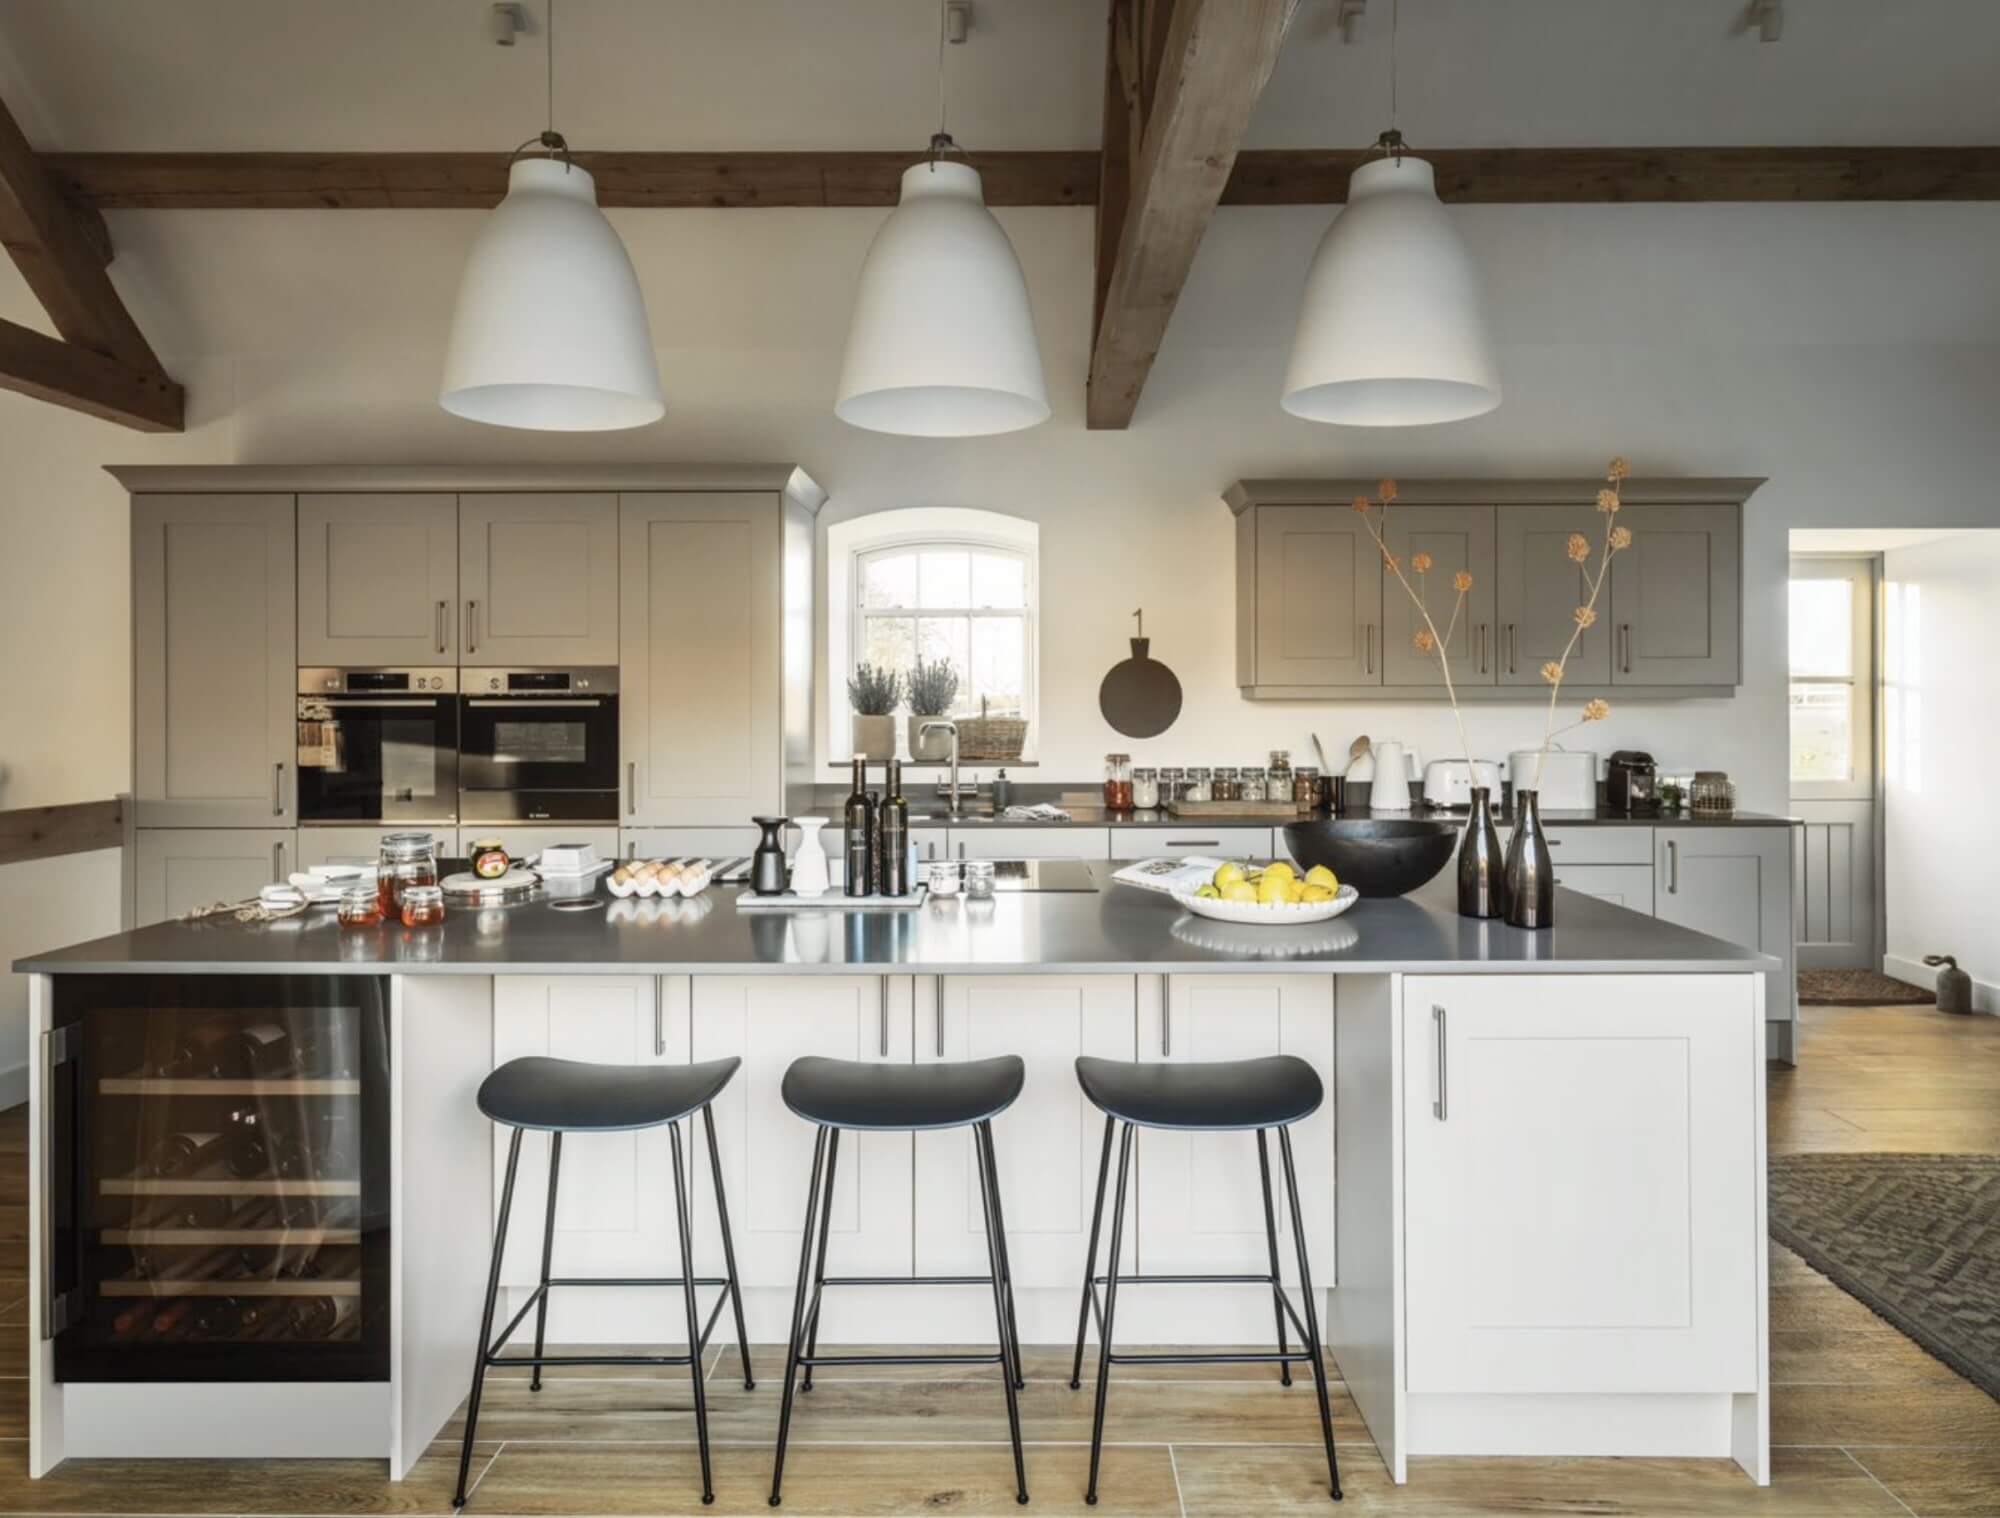 Kelly Hoppen designs her new home - a barn in the British countryside